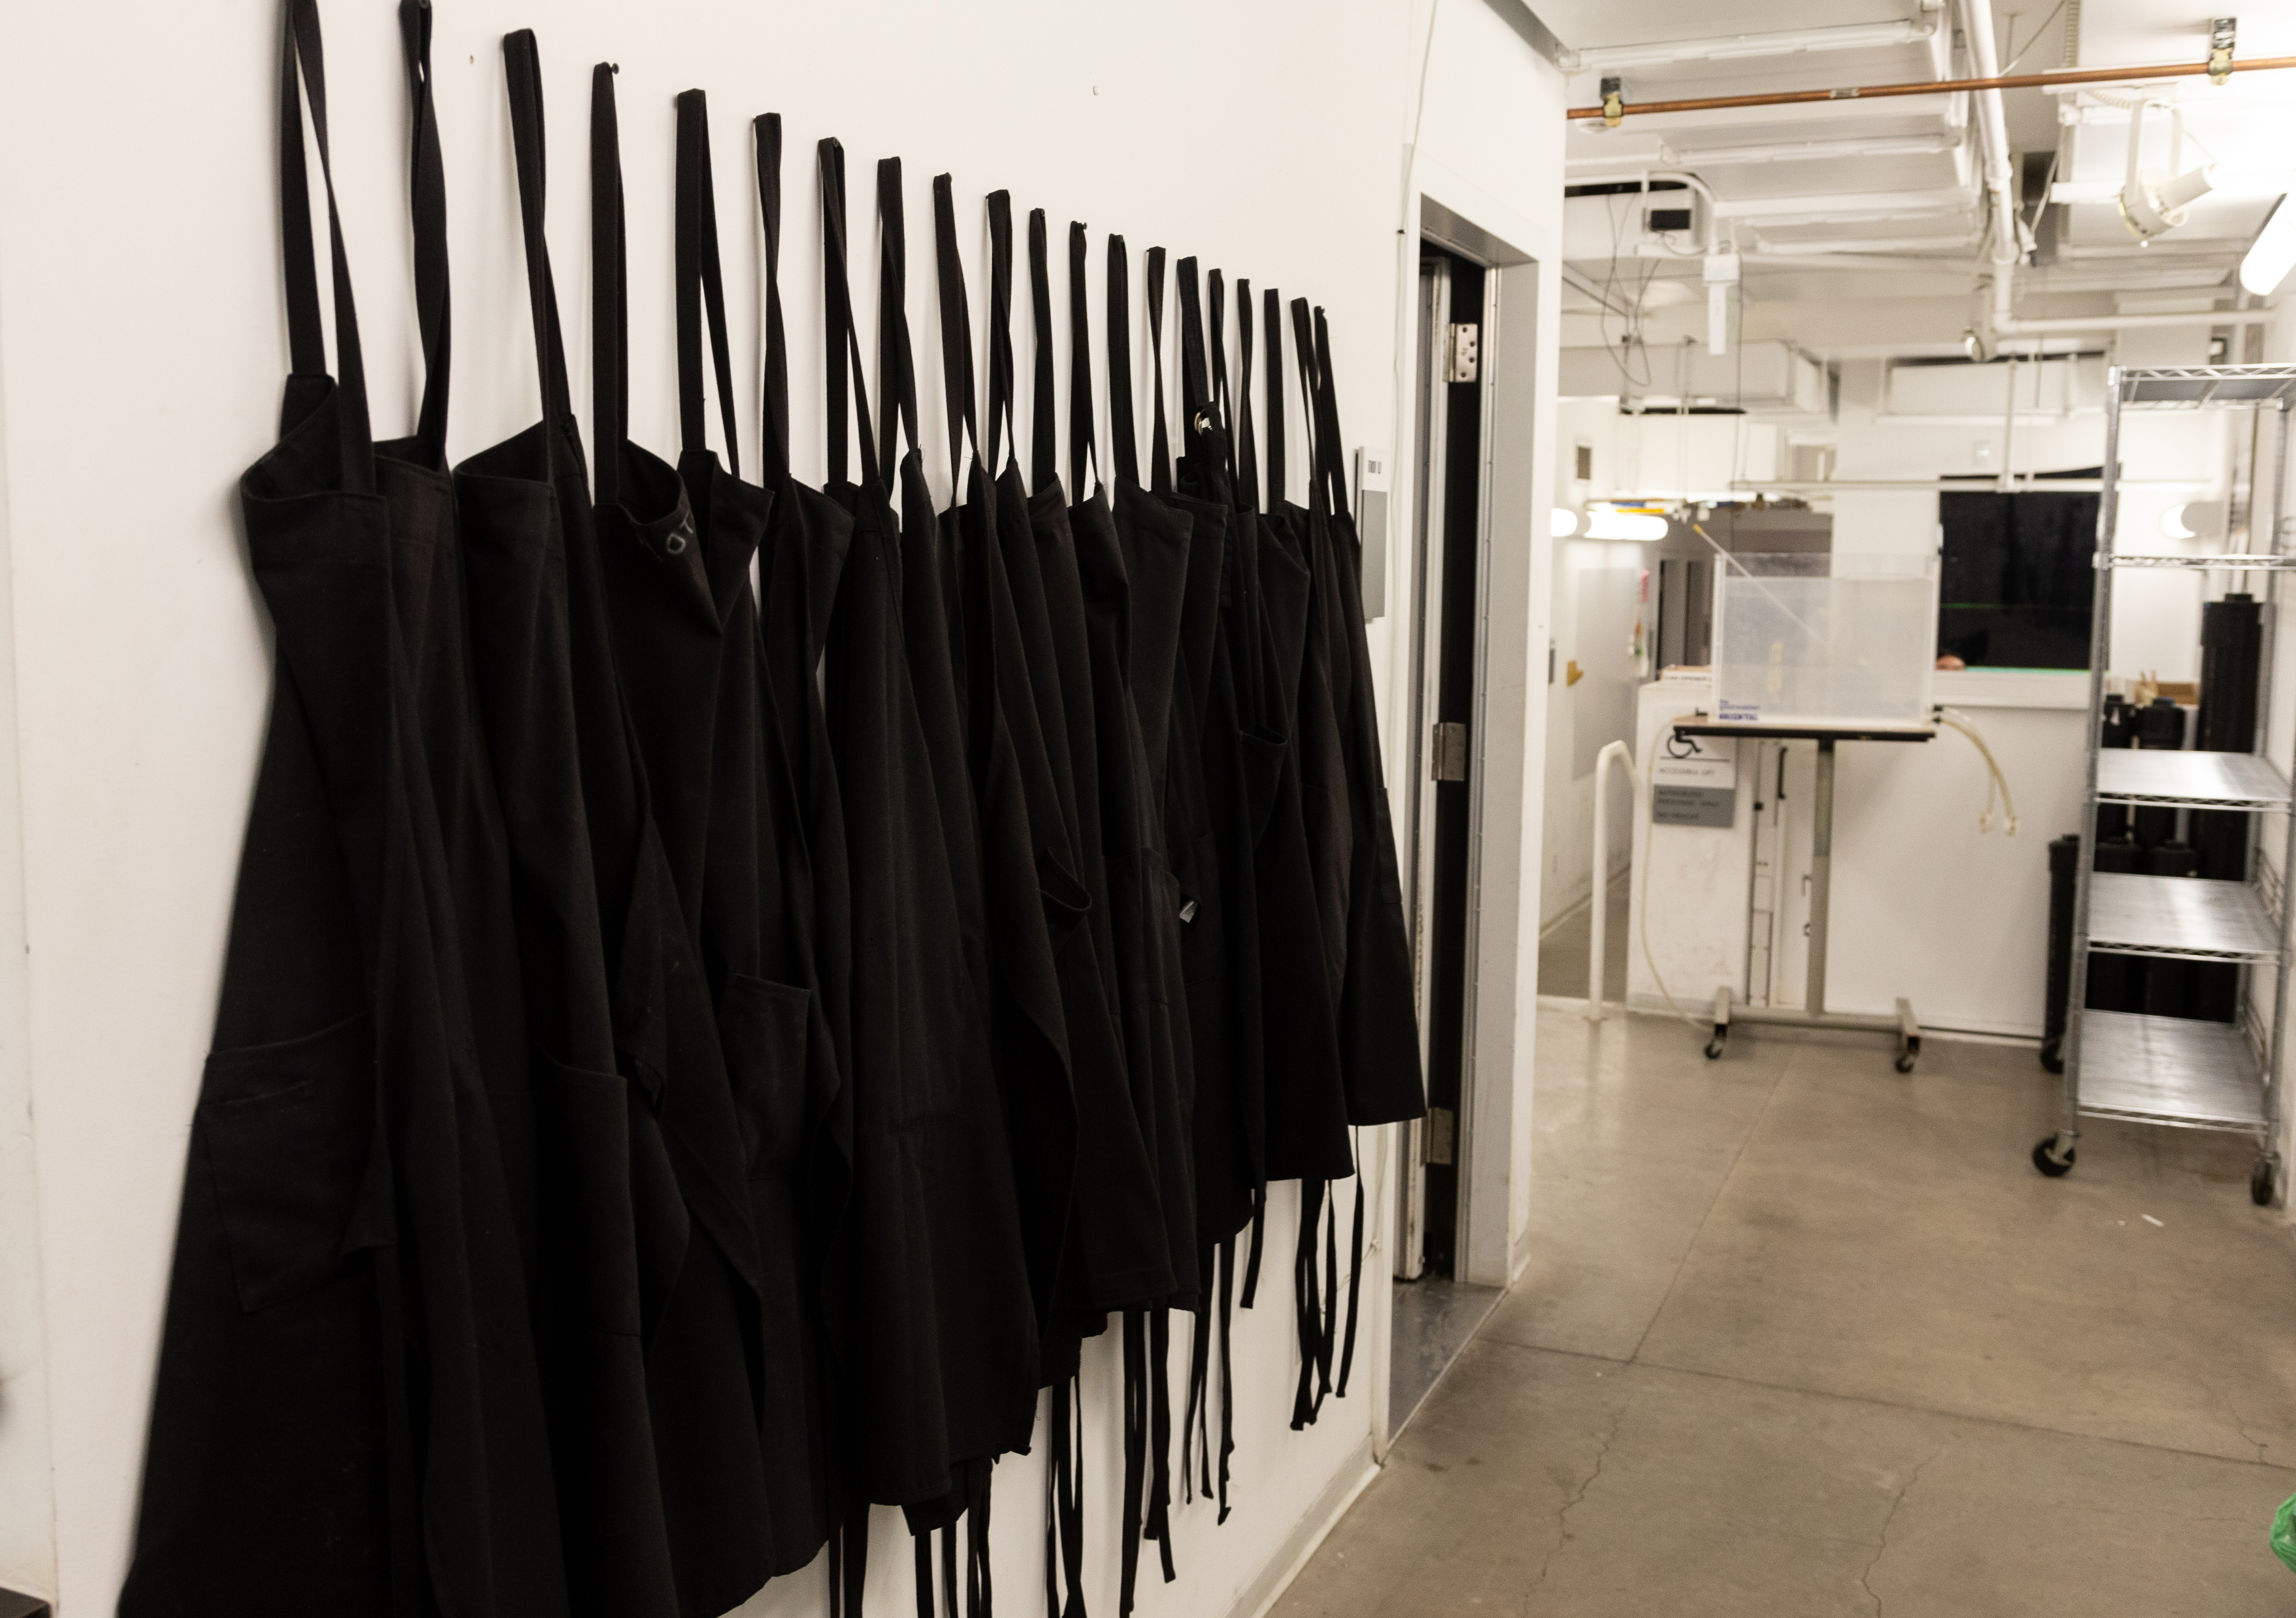 Aprons hanging on a wall in the photography lab